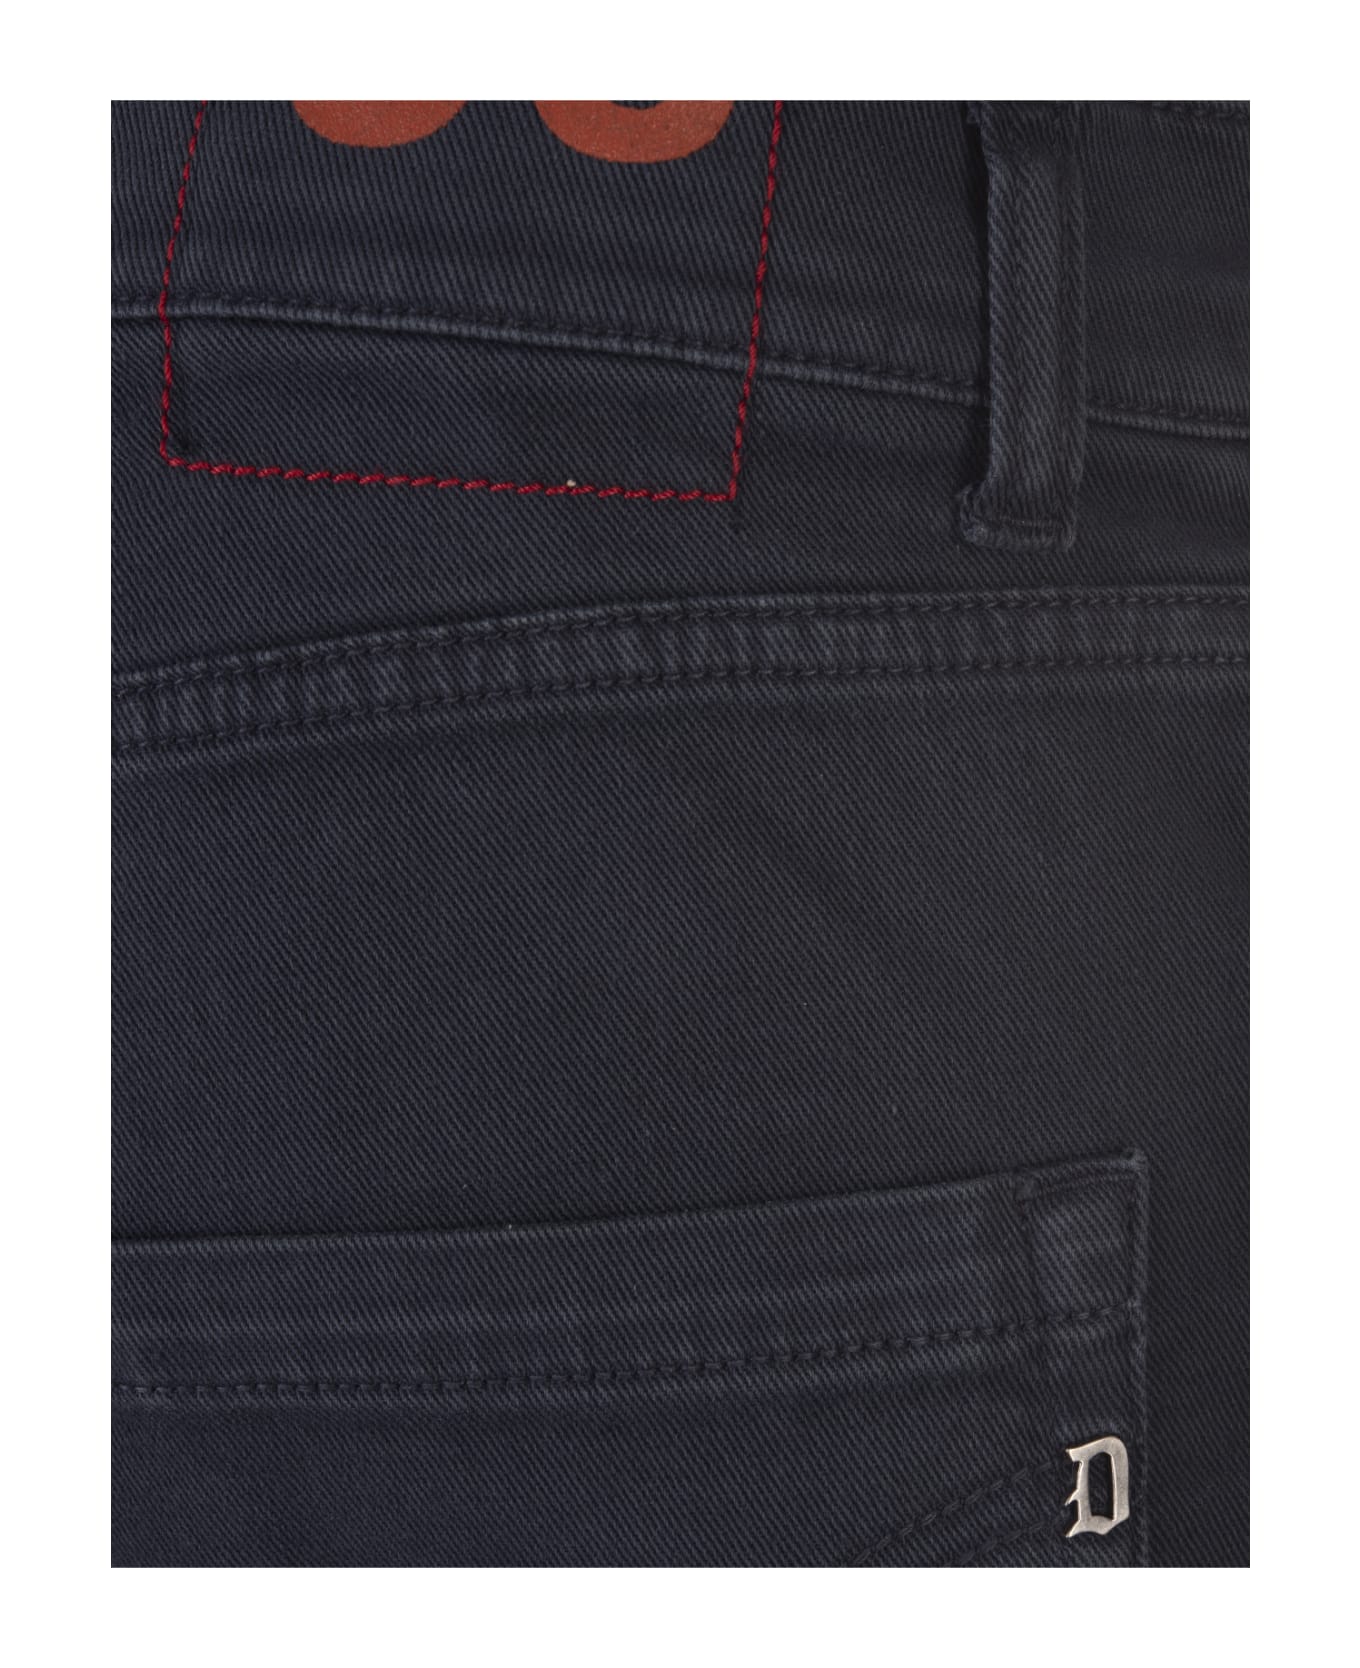 Dondup Mius Slim Fit Jeans In Ink Blue Bull Stretch - Blue